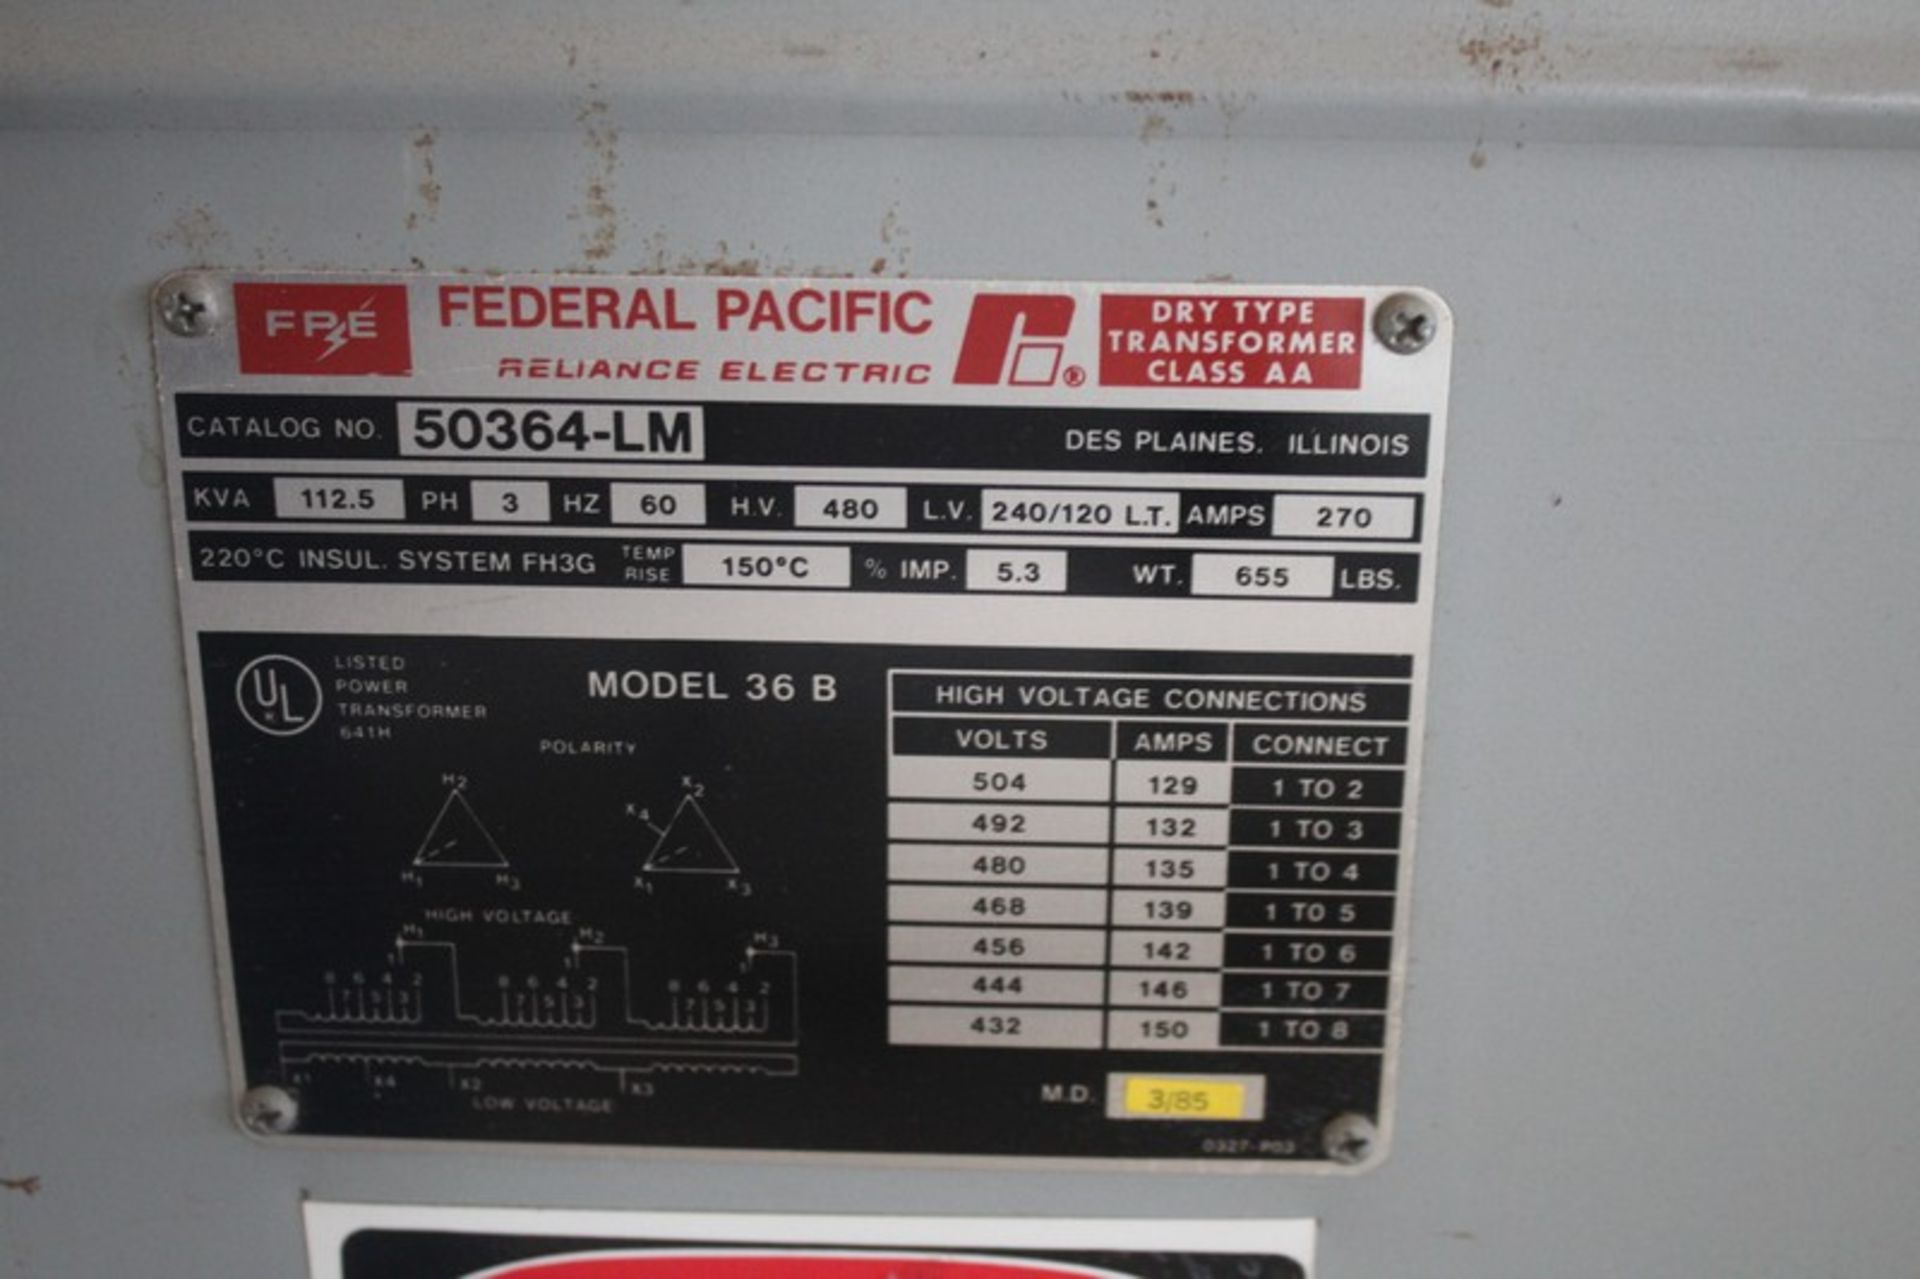 FEDERAL PACIFIC MODEL 36B, 3-PHASE, 112 KVA TRANSFORMER, CAT NO. 50364-LM, HV 480, LV 240/120 - Image 2 of 2